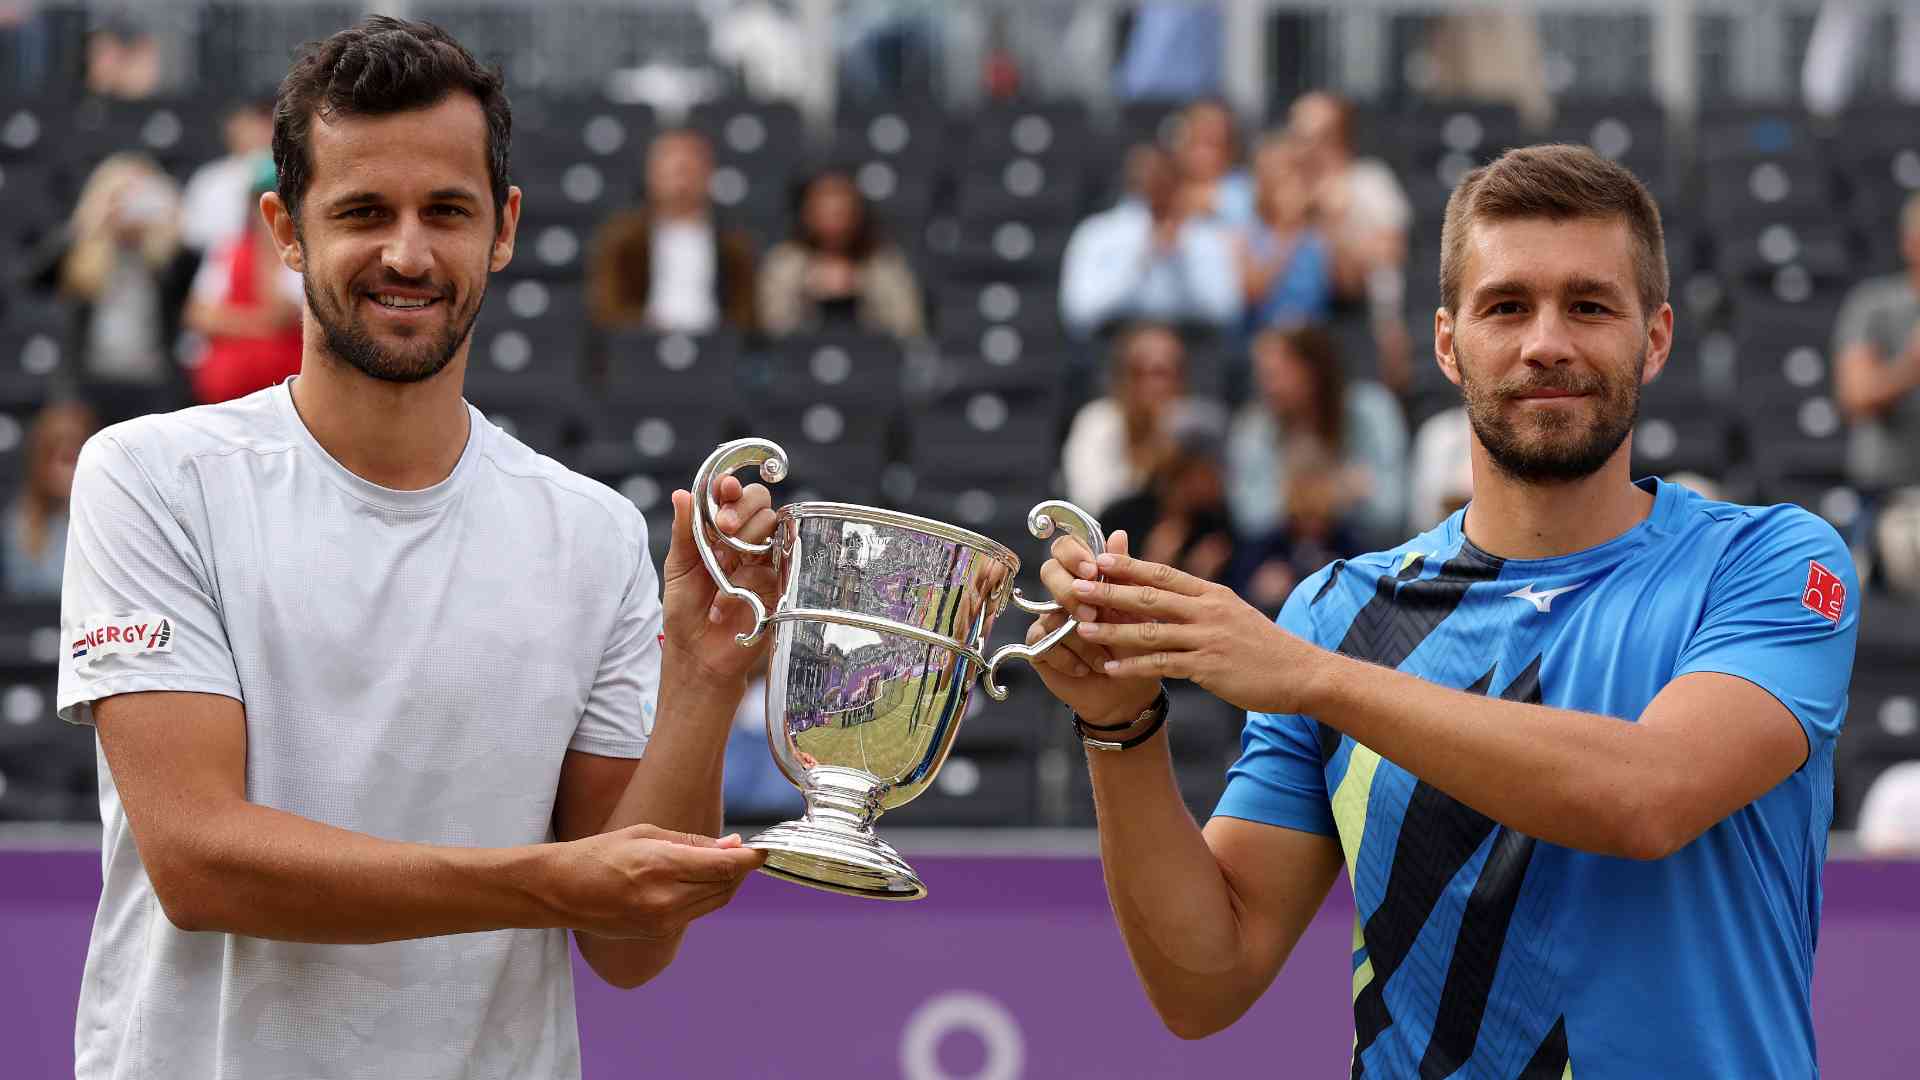 Nikola Mektic and Mate Pavic Complete Comeback For Queens Club Title ATP Tour Tennis